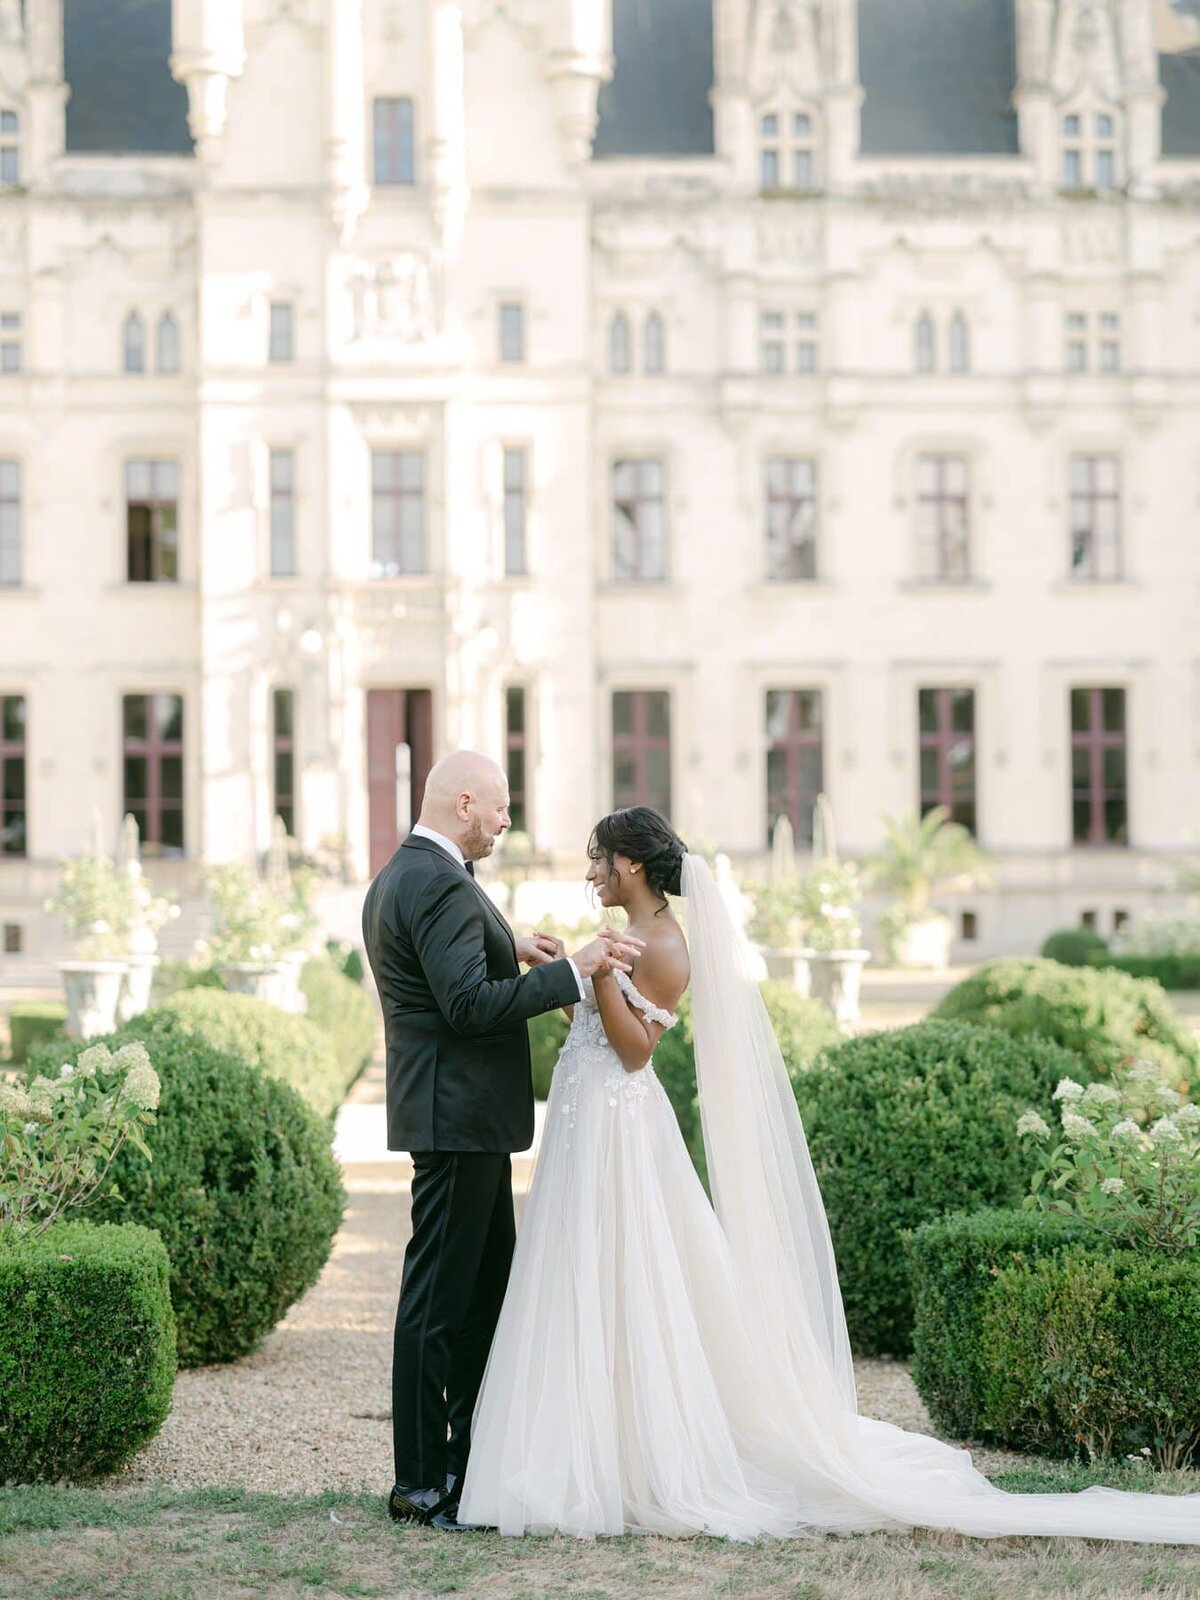 Serenity Photography - Wedding in France chateau 111